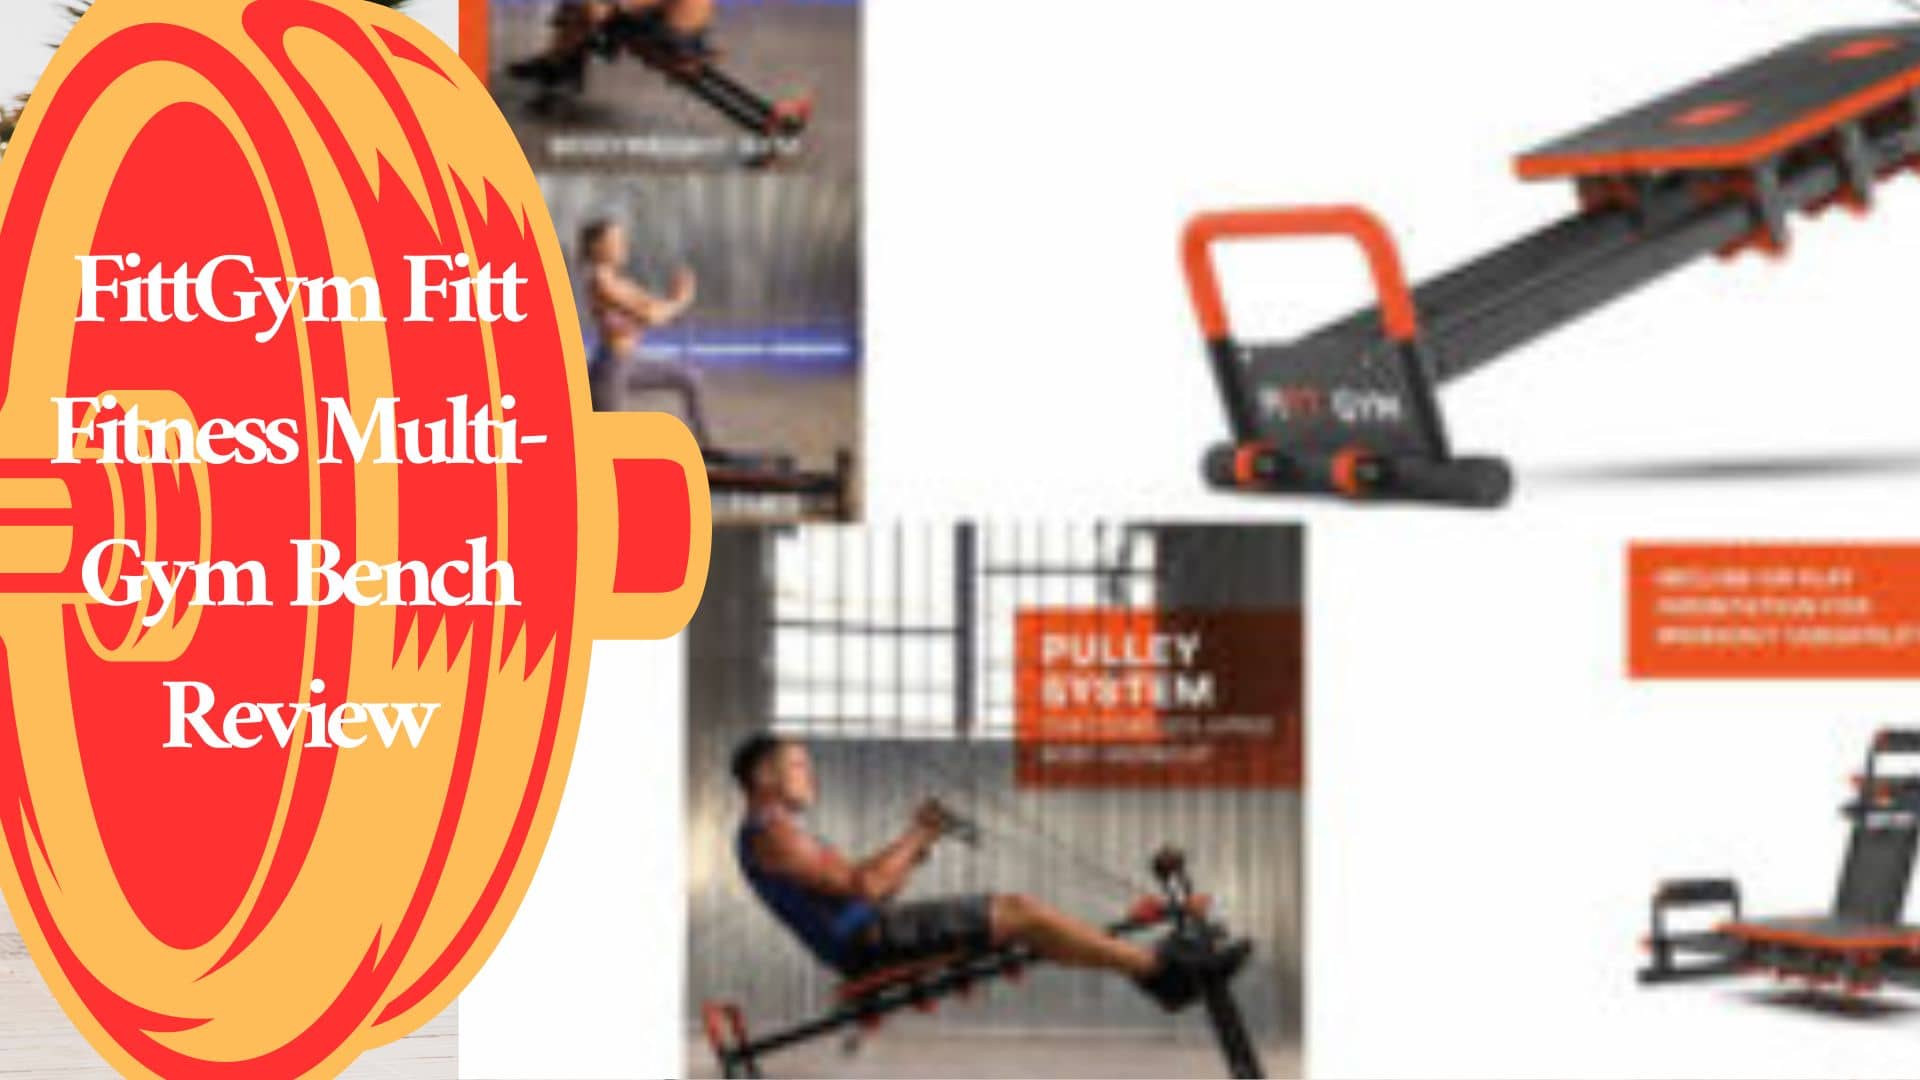 FittGym Fitt Fitness Multi-Gym Bench Review